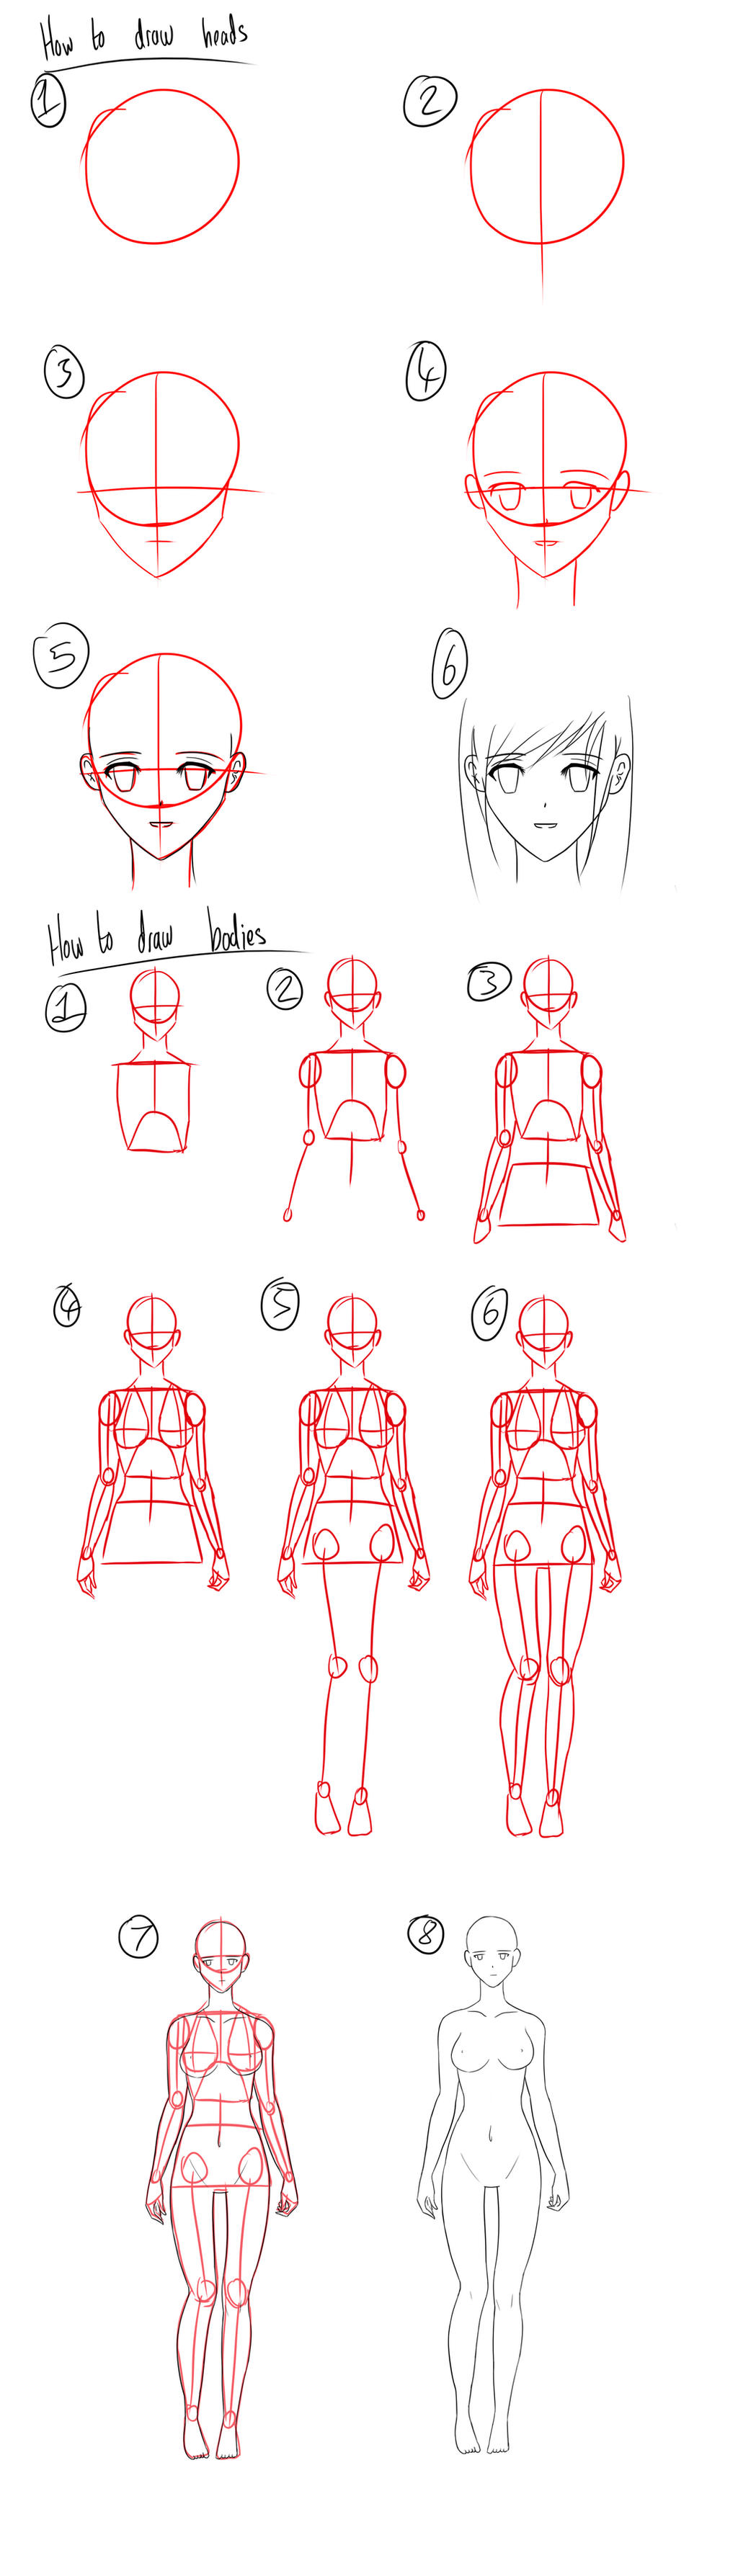 tutorial___how_to_draw_anime_heads_female_bodies_by_micky_k-d5hpce5.jpg